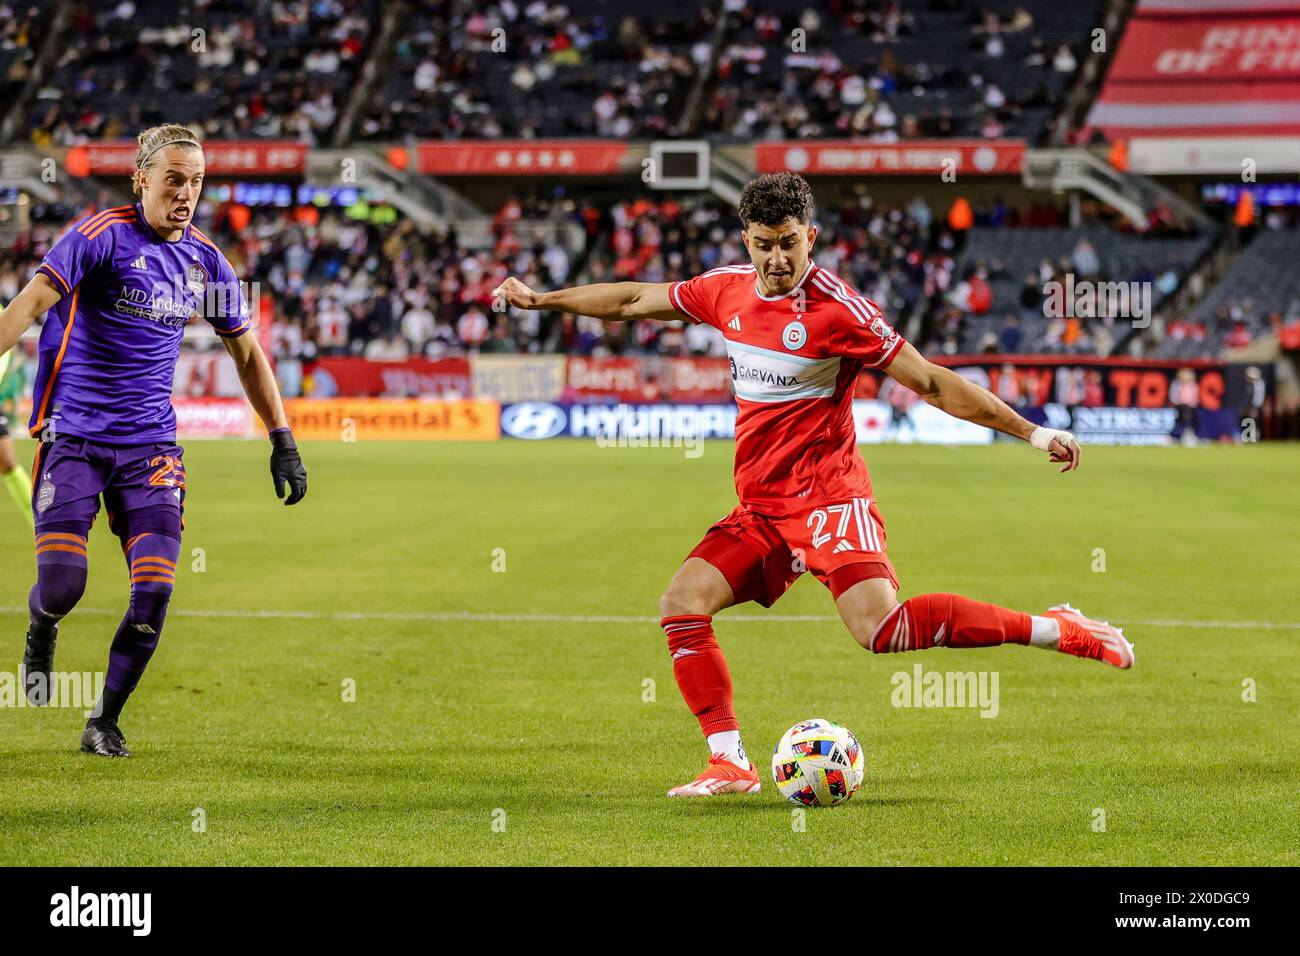 Allan Arigoni #27 of Chicago Fire FC performing a kick in Chicago, IL. Stock Photo